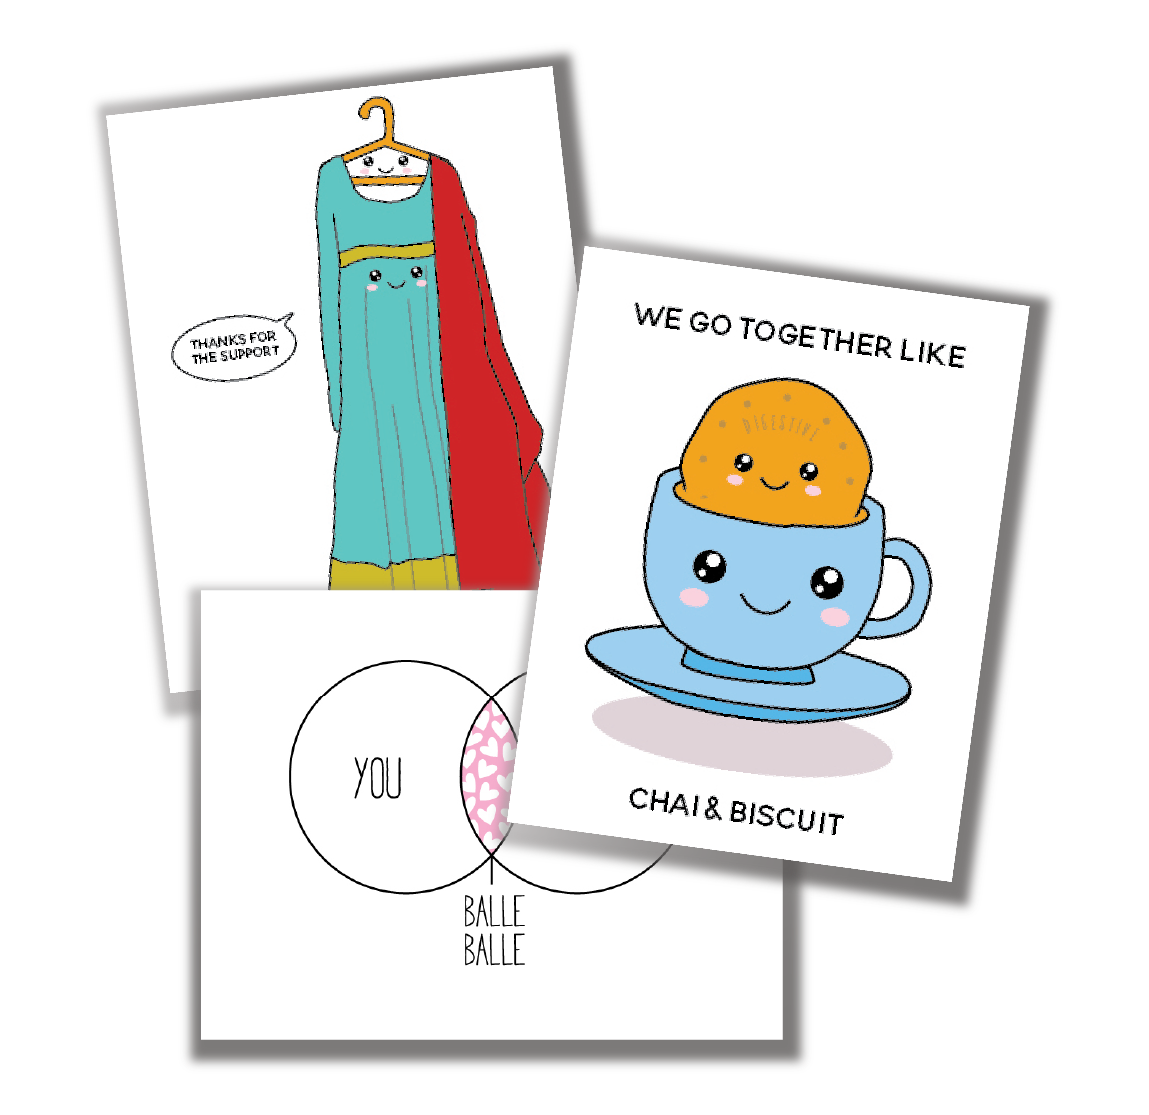 Three examples of greeting cards.